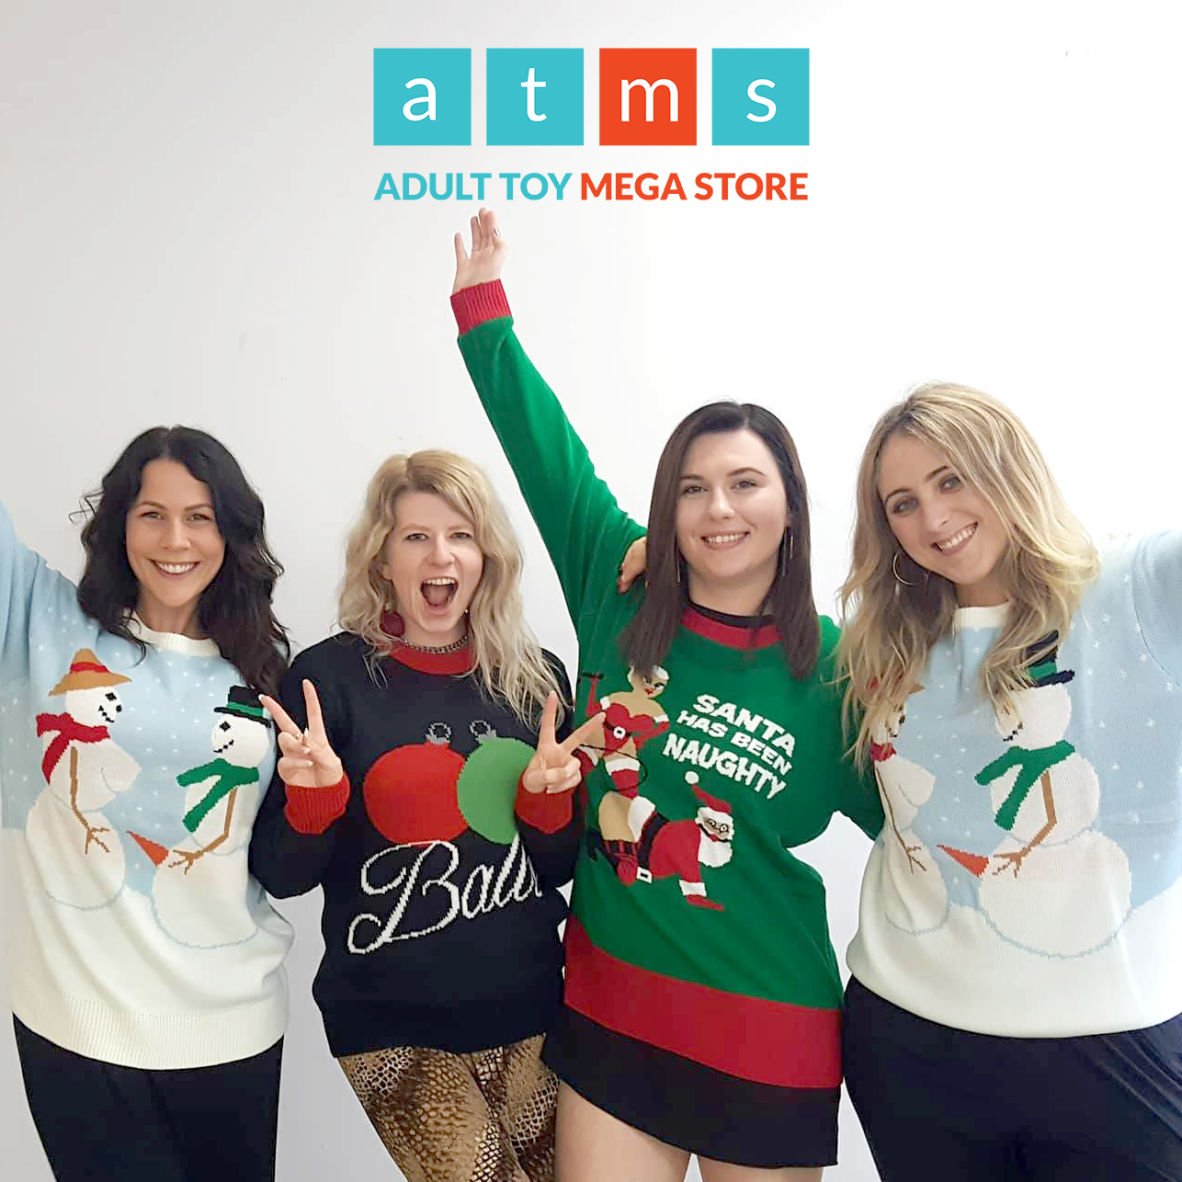 ATMS Naughty Xmas Sweater Giveaway!